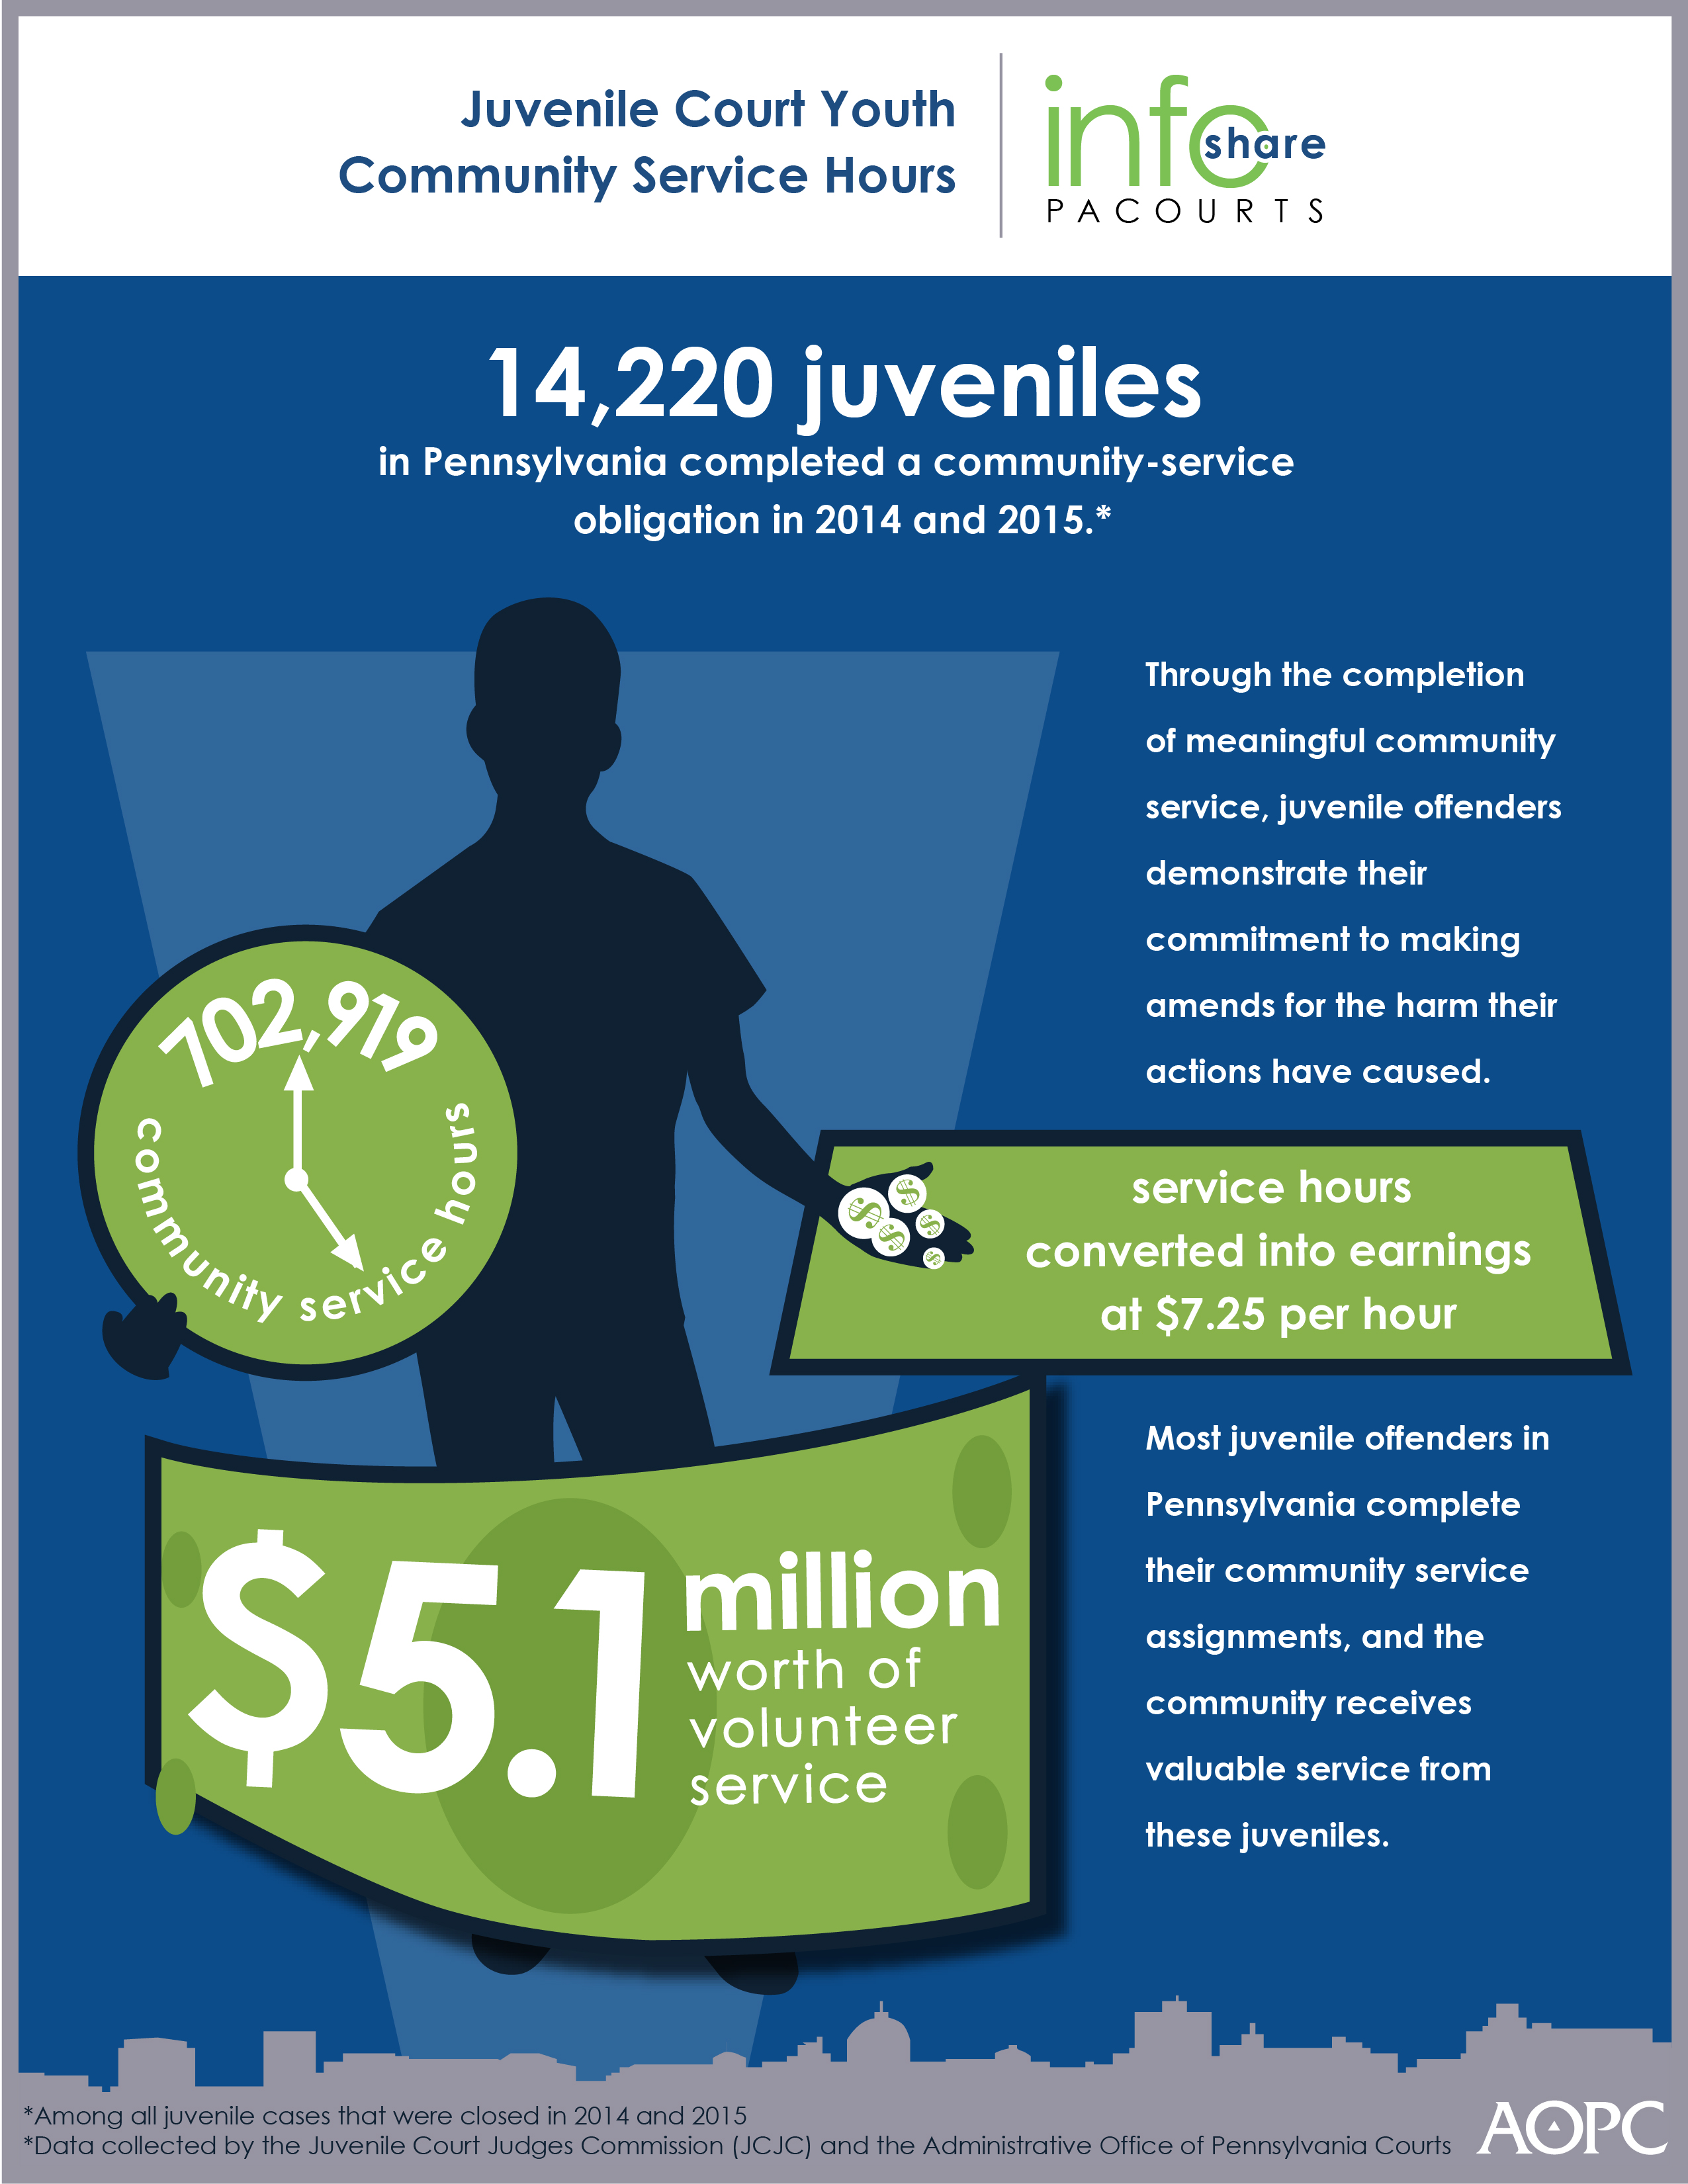 Pennsylvania communities receive valuable service from juvenile offenders - 006303.jpg